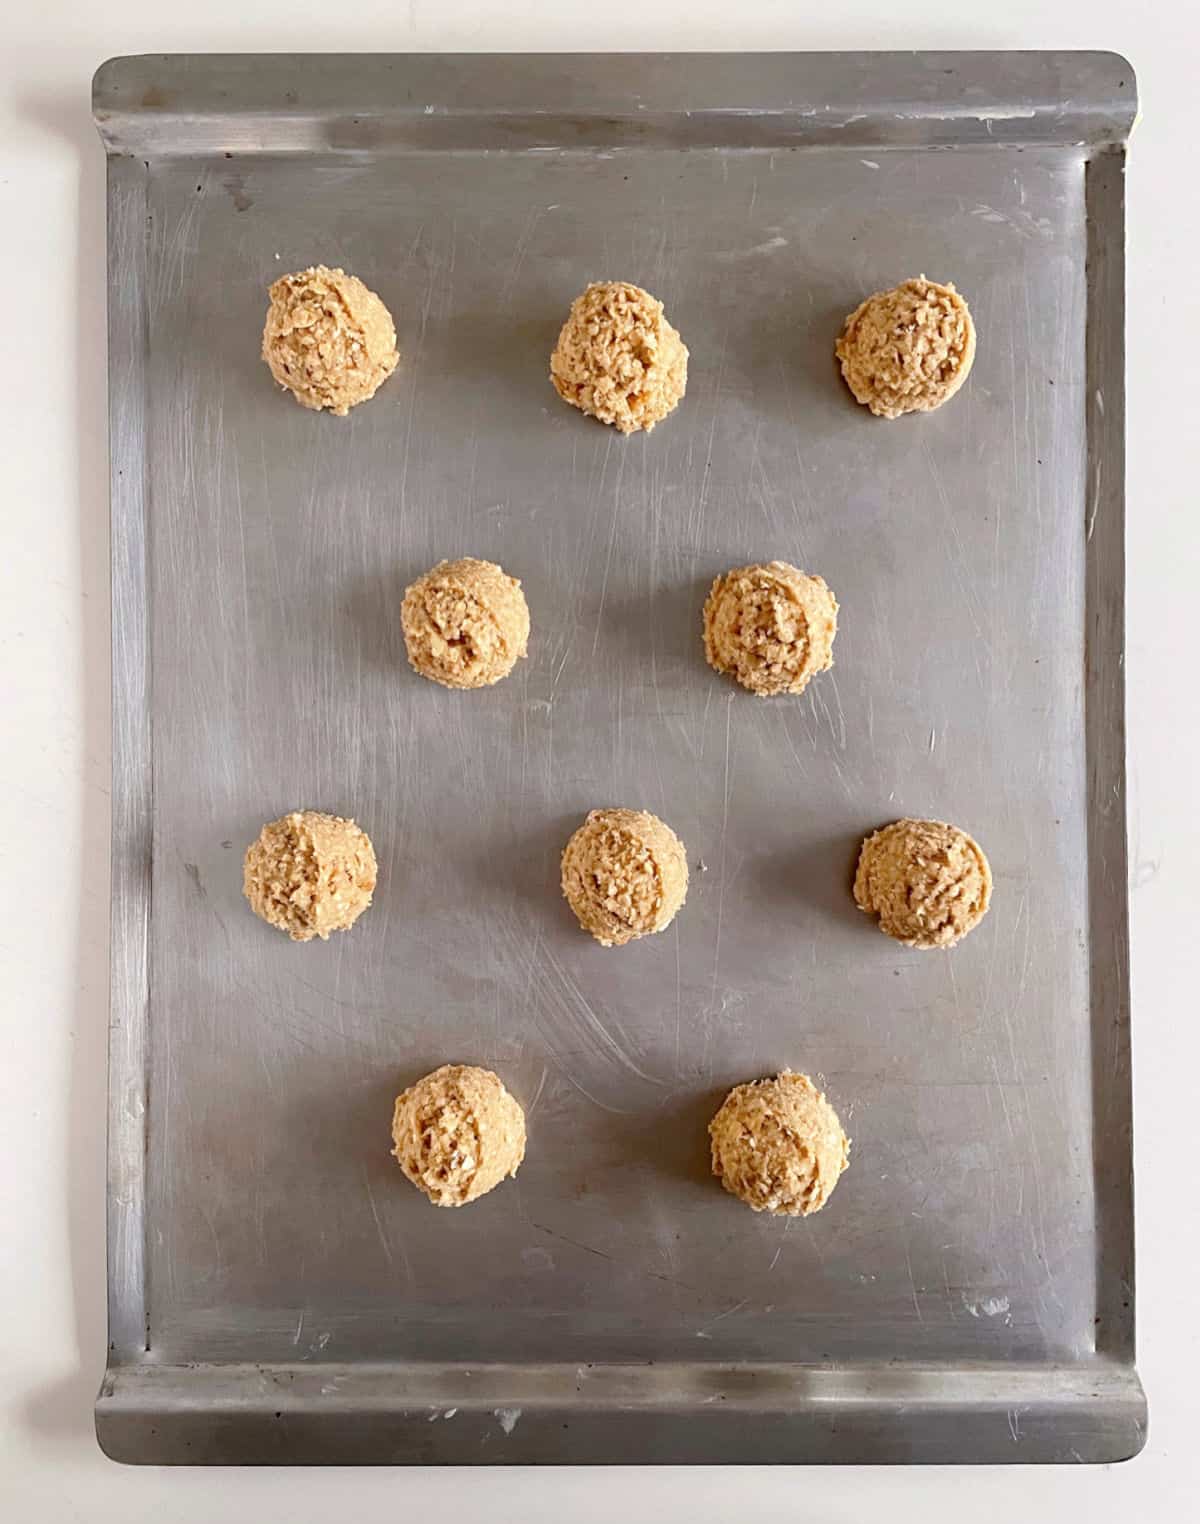 Overview of metal sheet pan with unbaked oatmeal cookies.